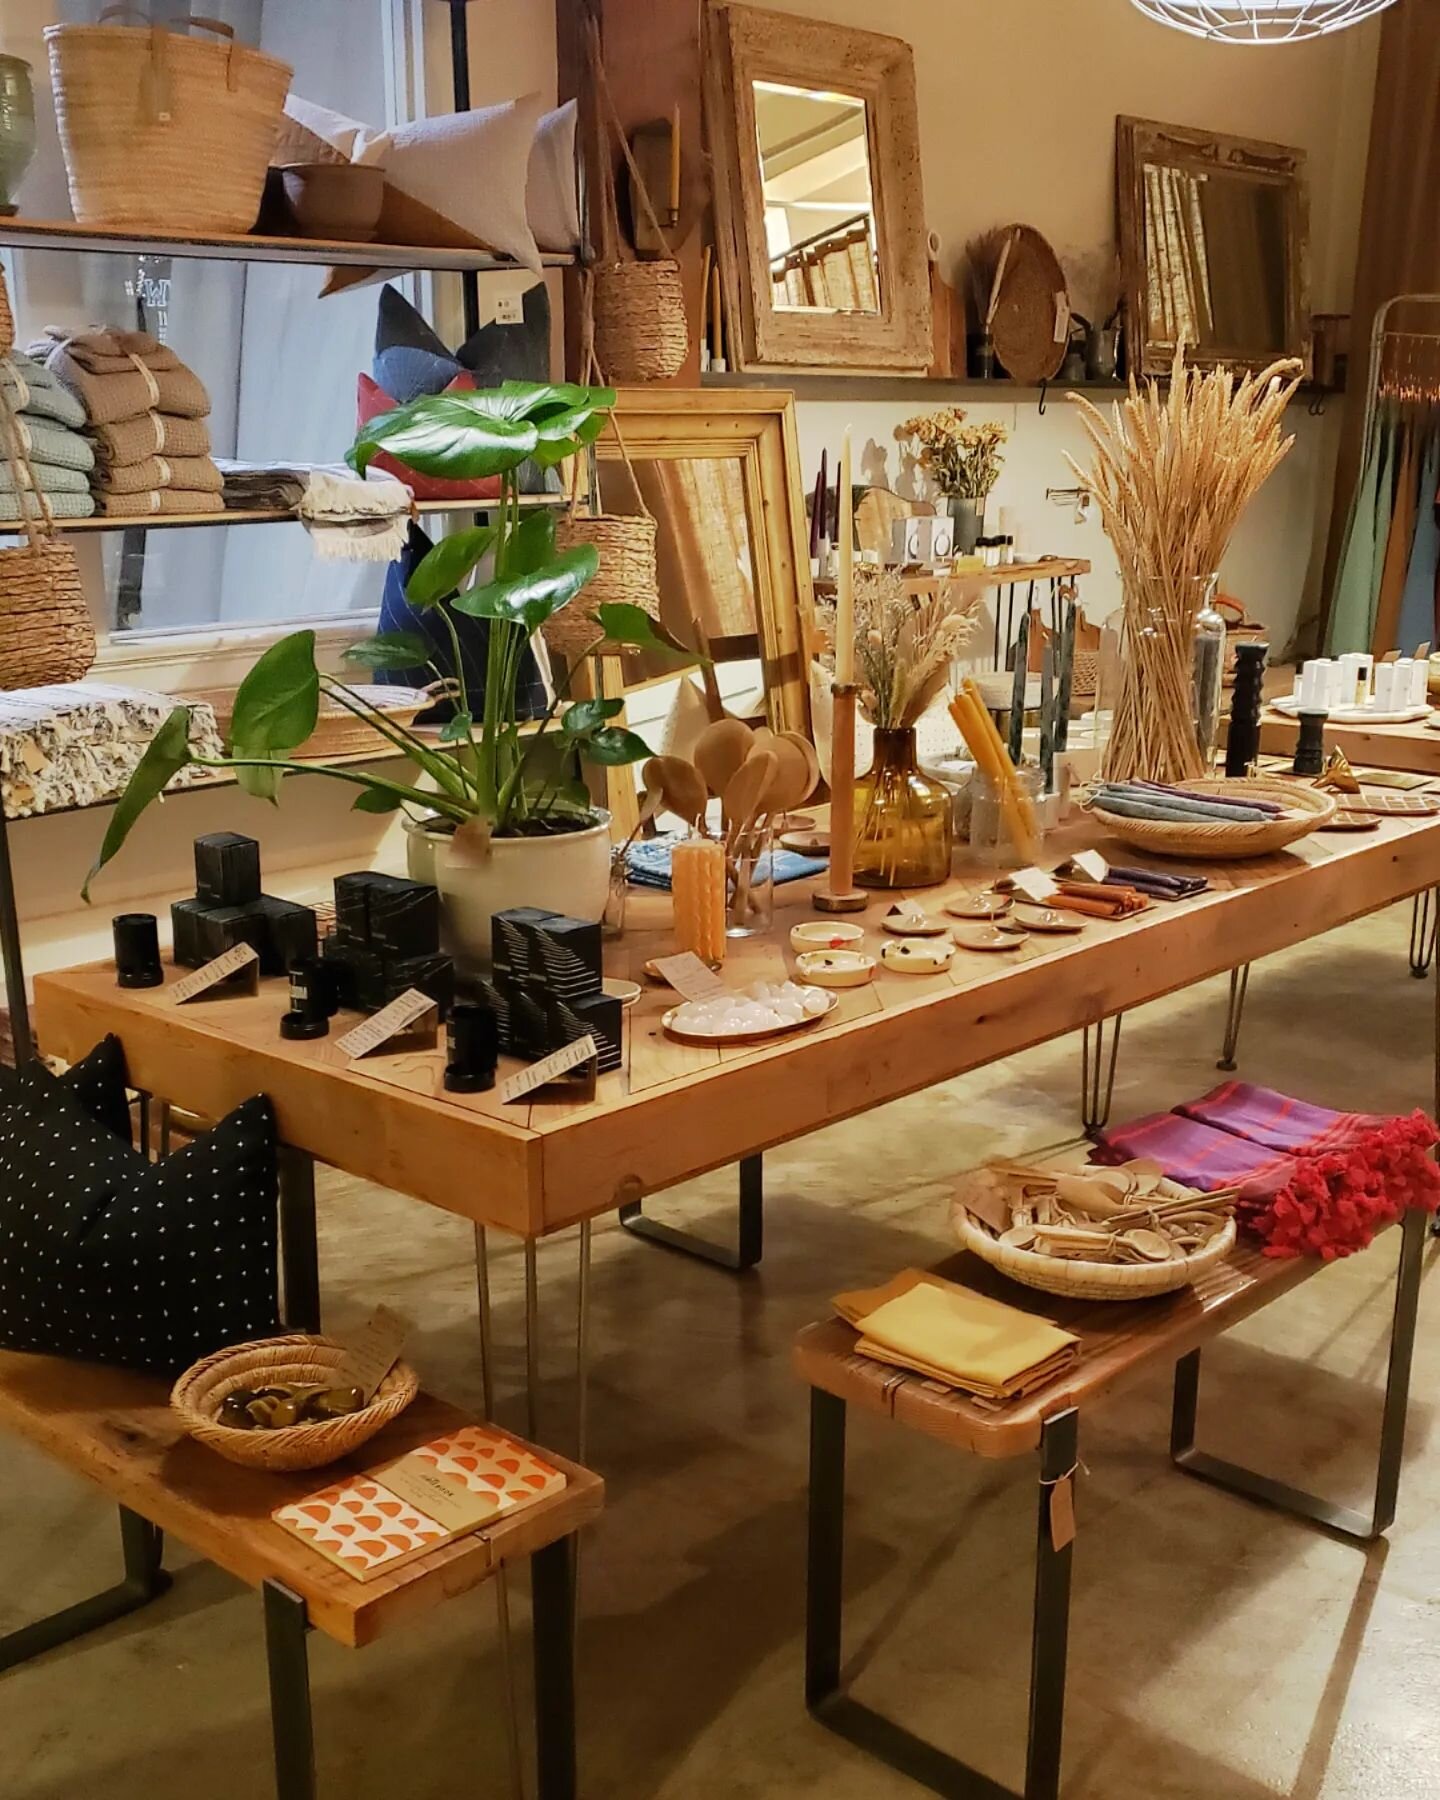 We are open today at 11! 

Swing by for some incense, candles, plants or textiles for the home. While supplies last. ❤

This photo is taken from late last night. I love the cozy glow.

#chariothome #summer2022